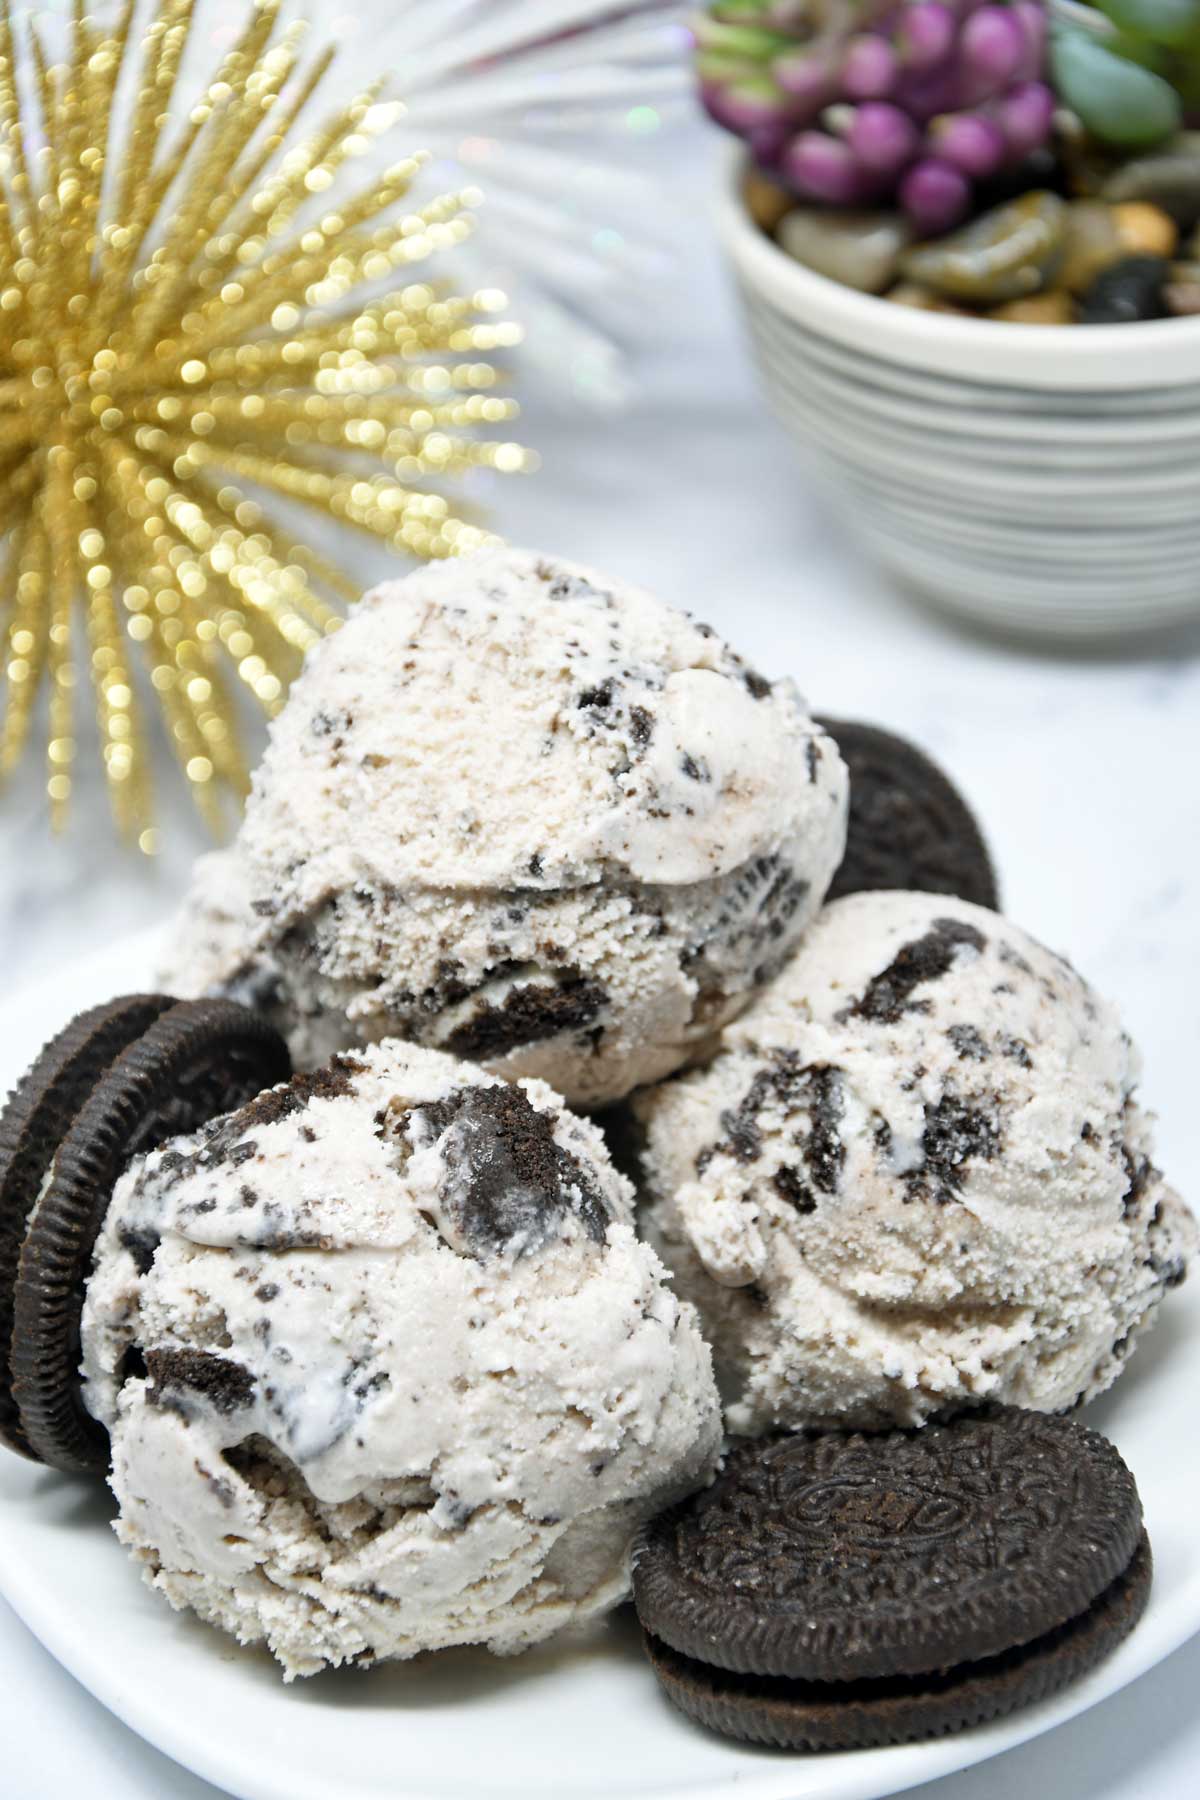 Cookies and cream ice cream scoops in a plate.